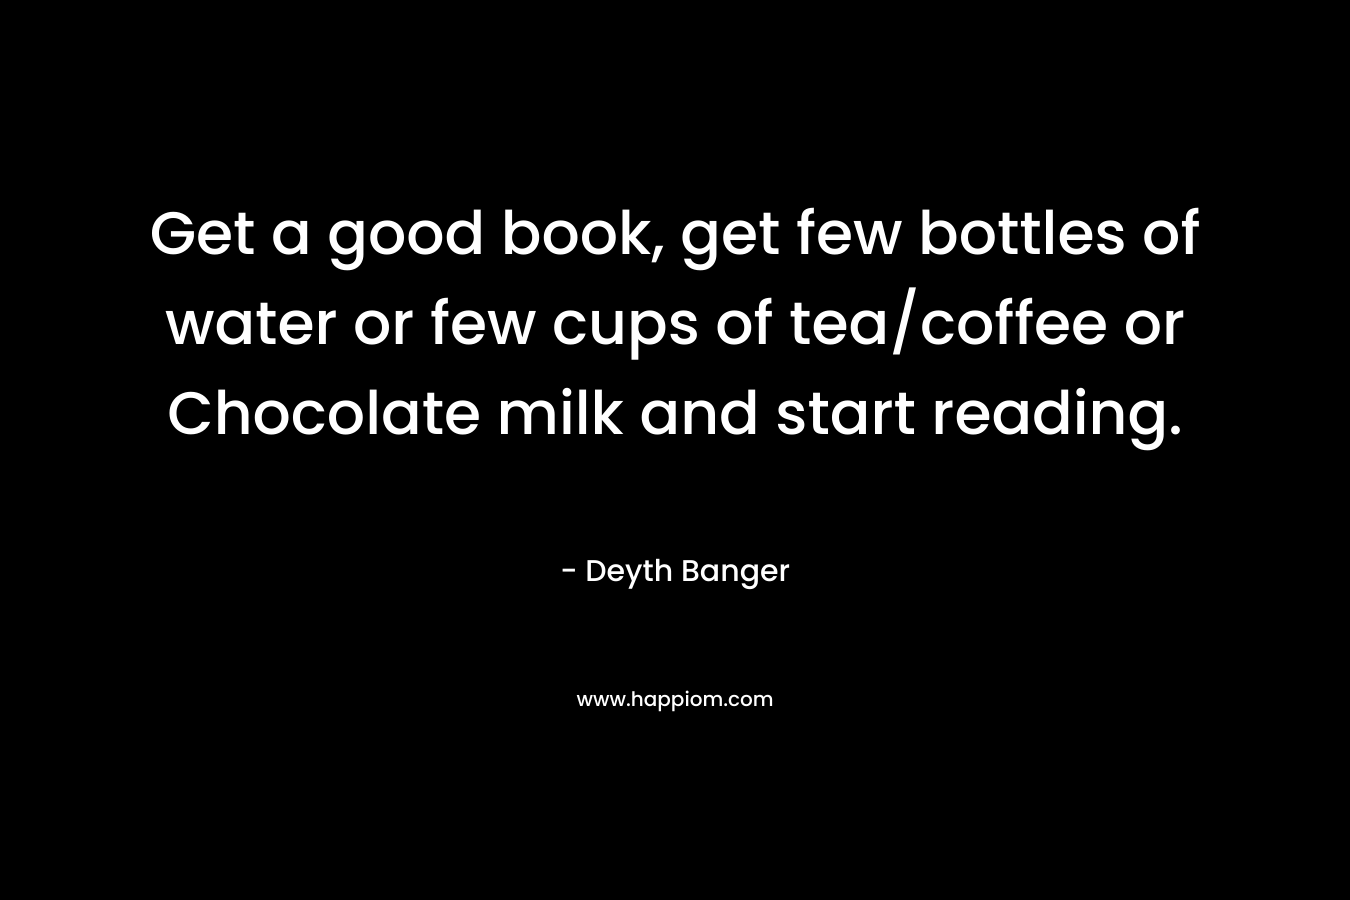 Get a good book, get few bottles of water or few cups of tea/coffee or Chocolate milk and start reading.